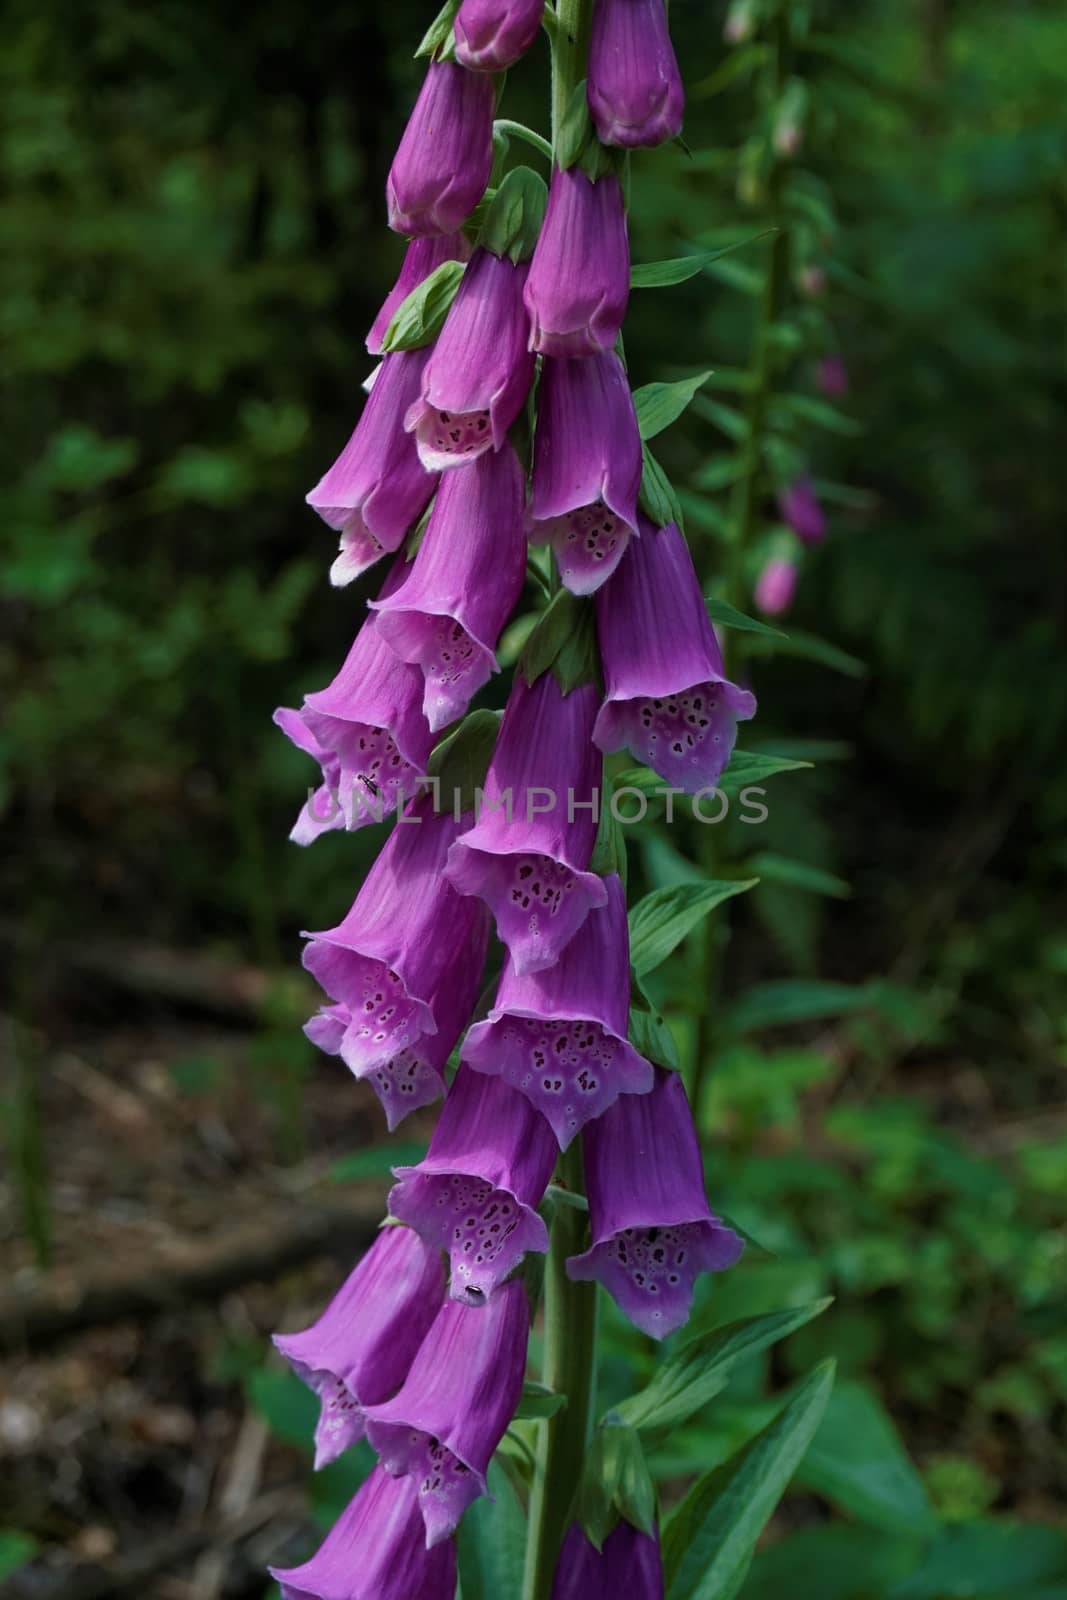 Common foxglove plant spotted in the forest by pisces2386